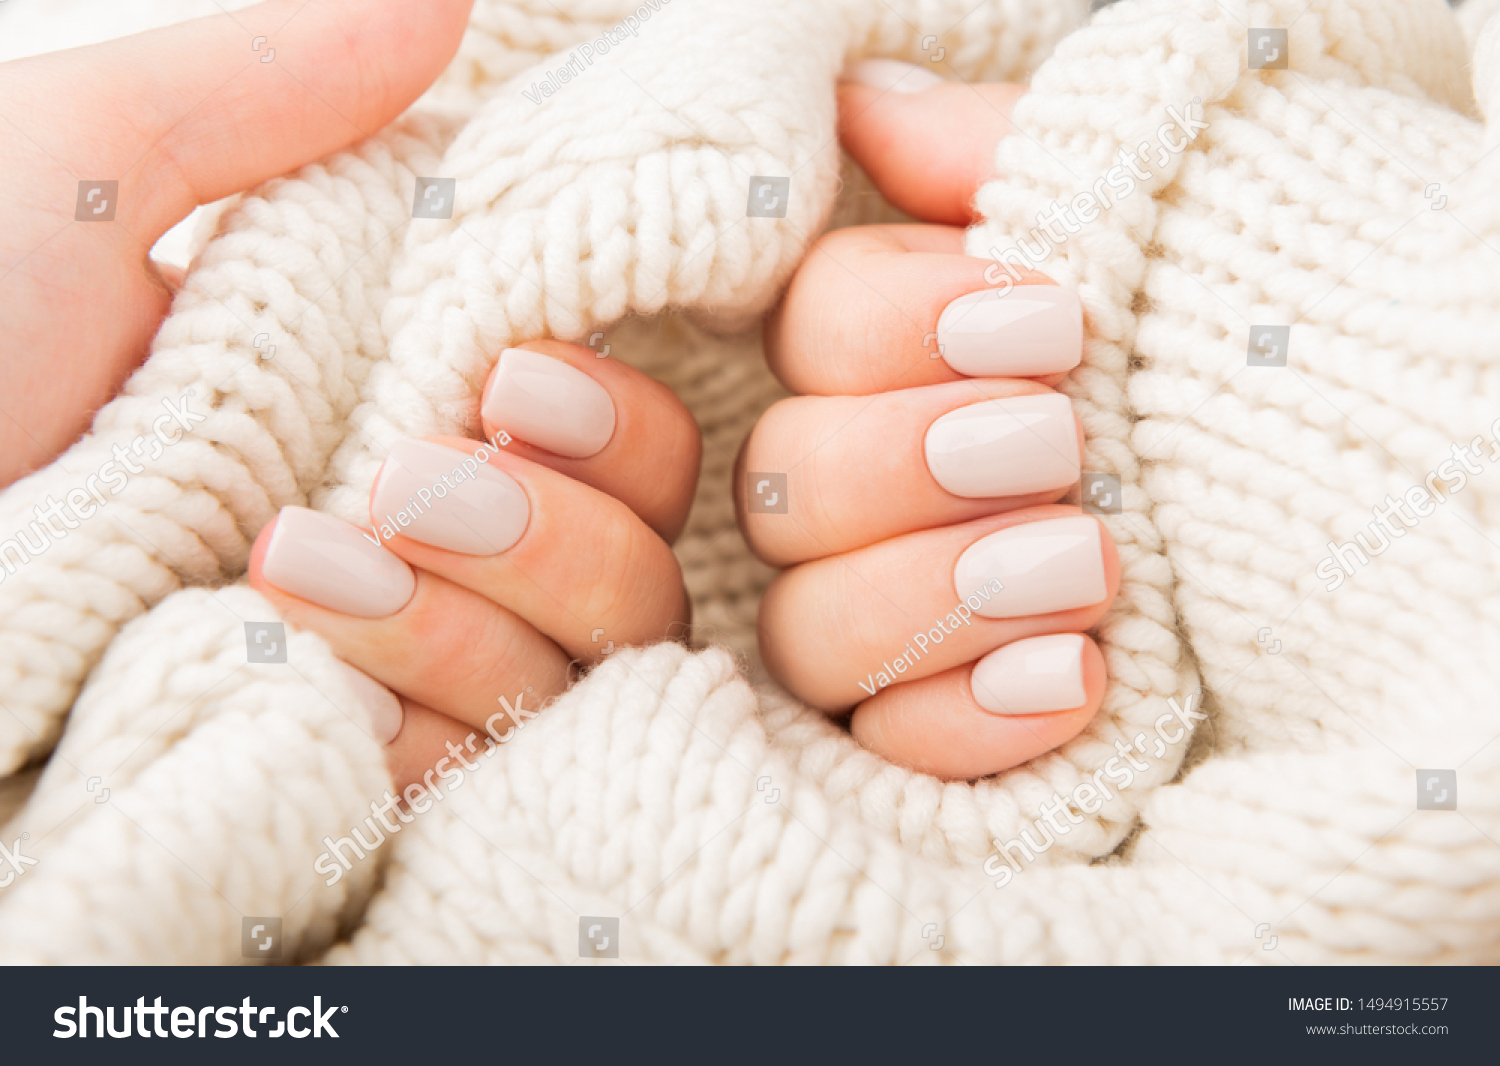 Stylish pastel beige Nails holding knitted wool material #1494915557